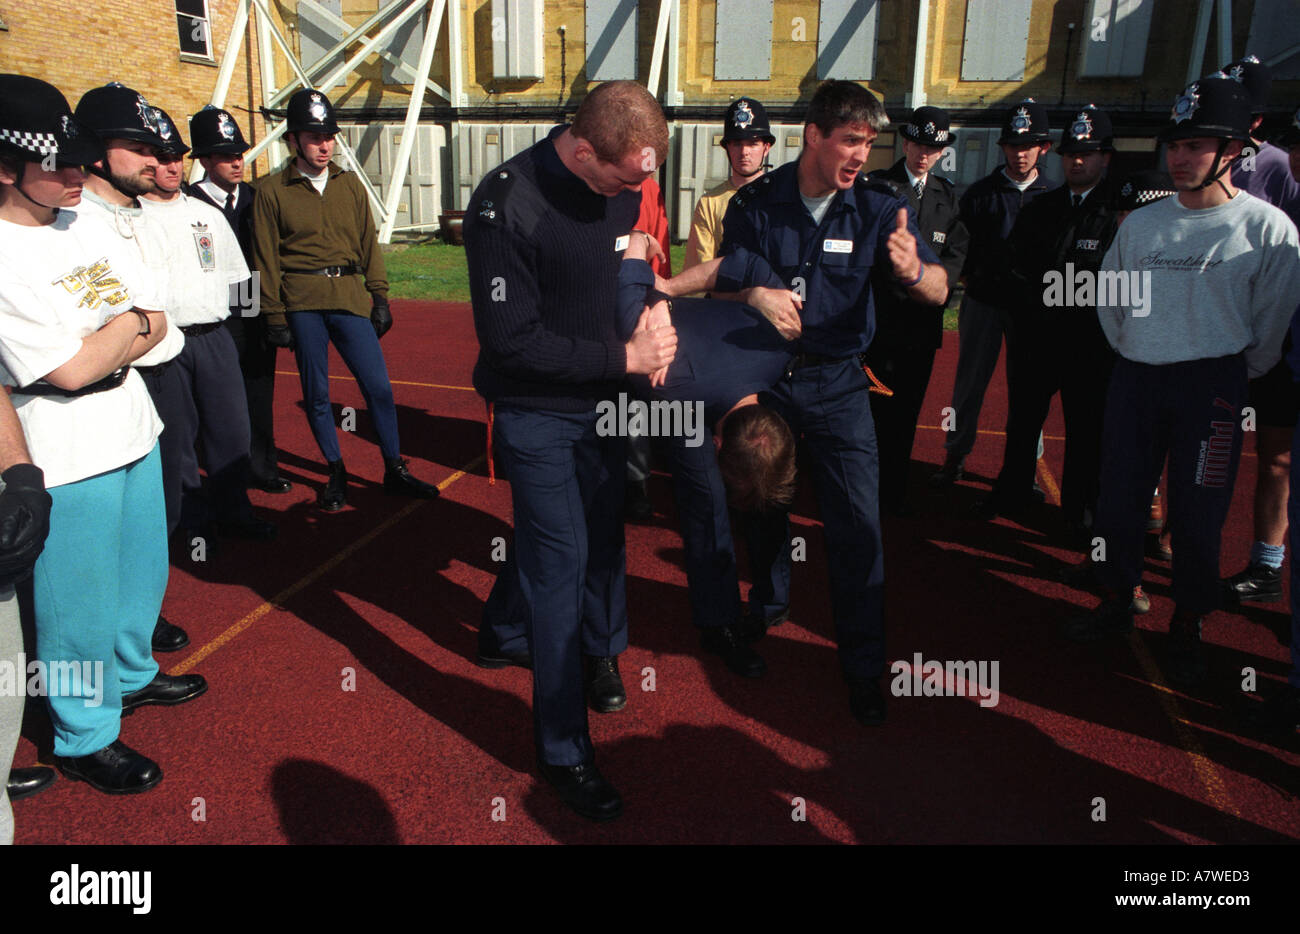 Metropolitan police public order training instructors demonstrating arrest and restraint techniques to fellow officers, London, UK. Stock Photo